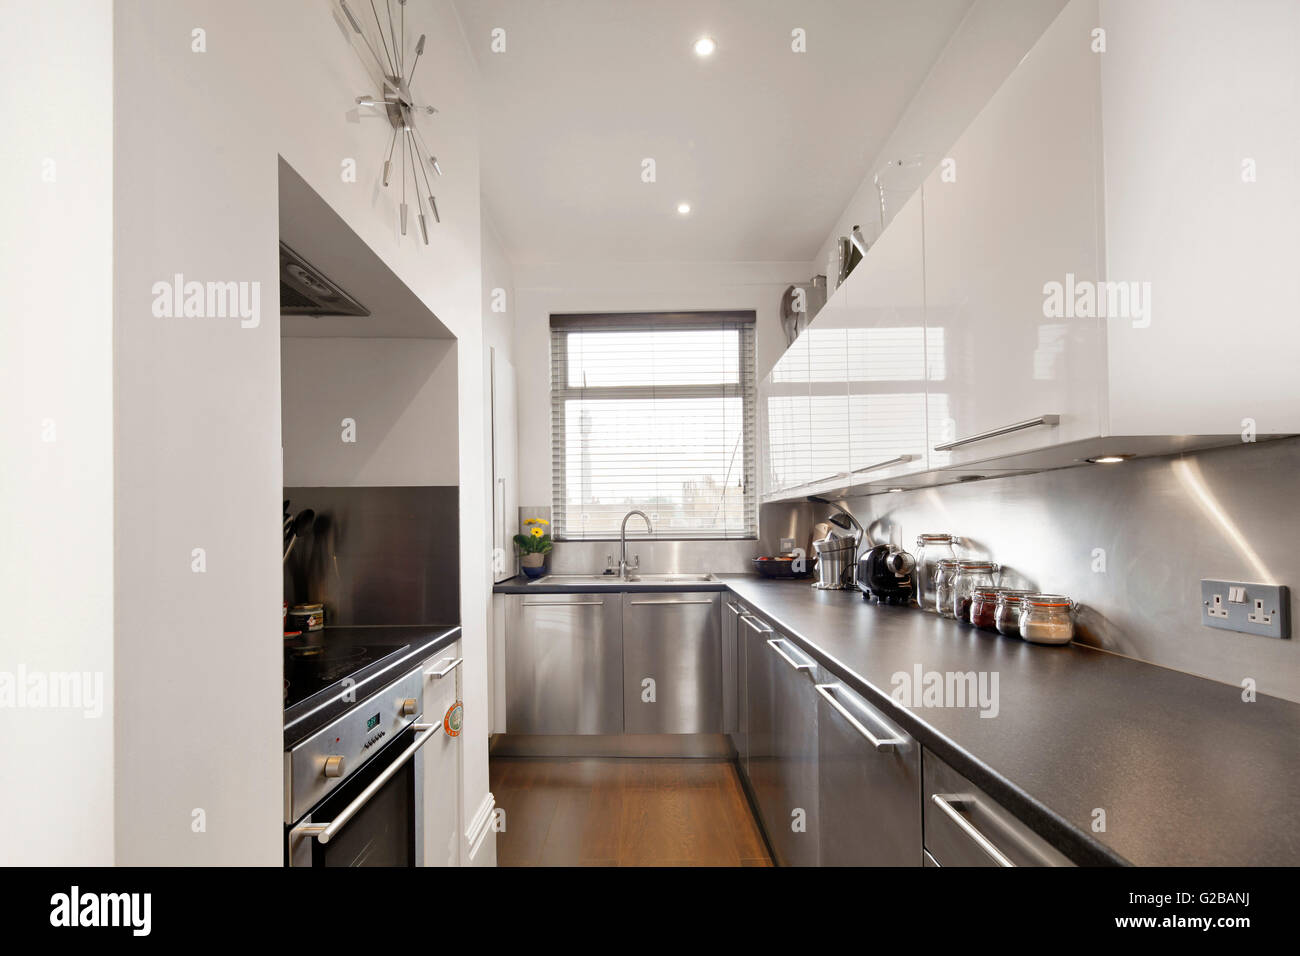 Walden House, Marylebone High Street. Modern kitchen with stainless steel countertops and appliances and white cabinets. Stock Photo